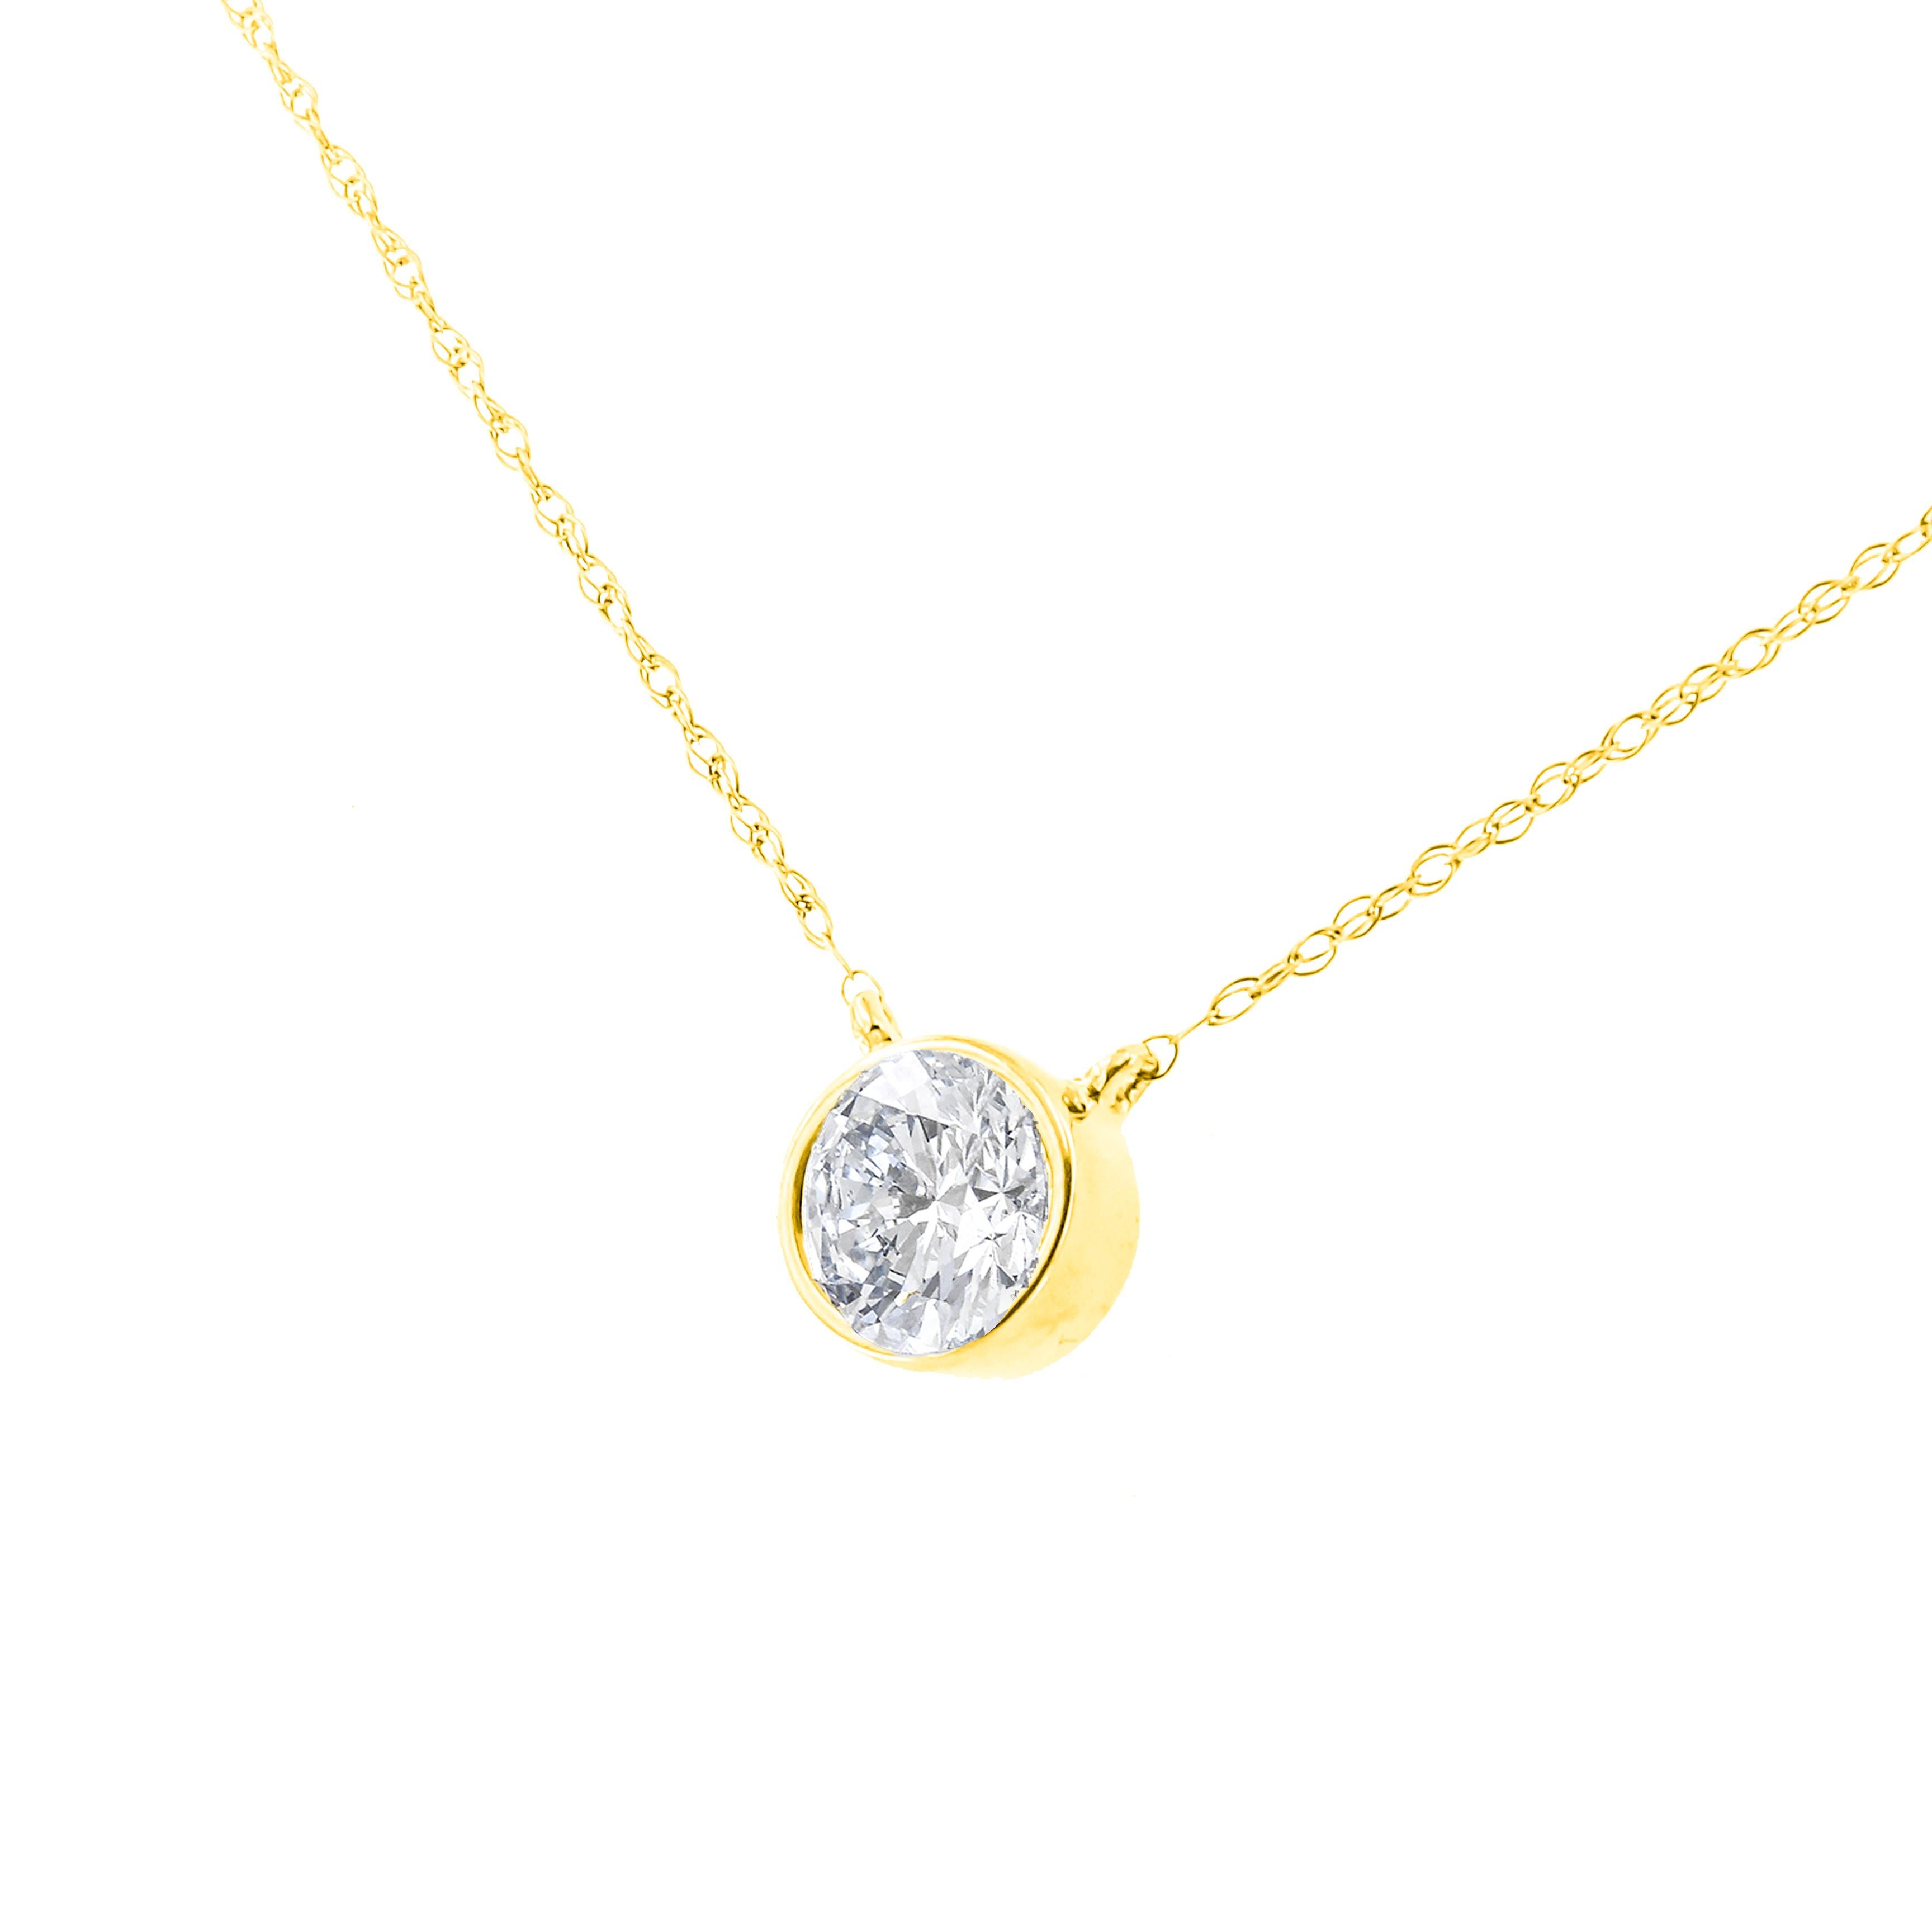 Wear this classic solitaire necklace to add a touch of elegance to your day. A glittering 1ct TDW round cut diamond is encircled in a bezel setting and anchored in the center of a delicate cable chain. This gorgeous pendant is crafted in 14k yellow